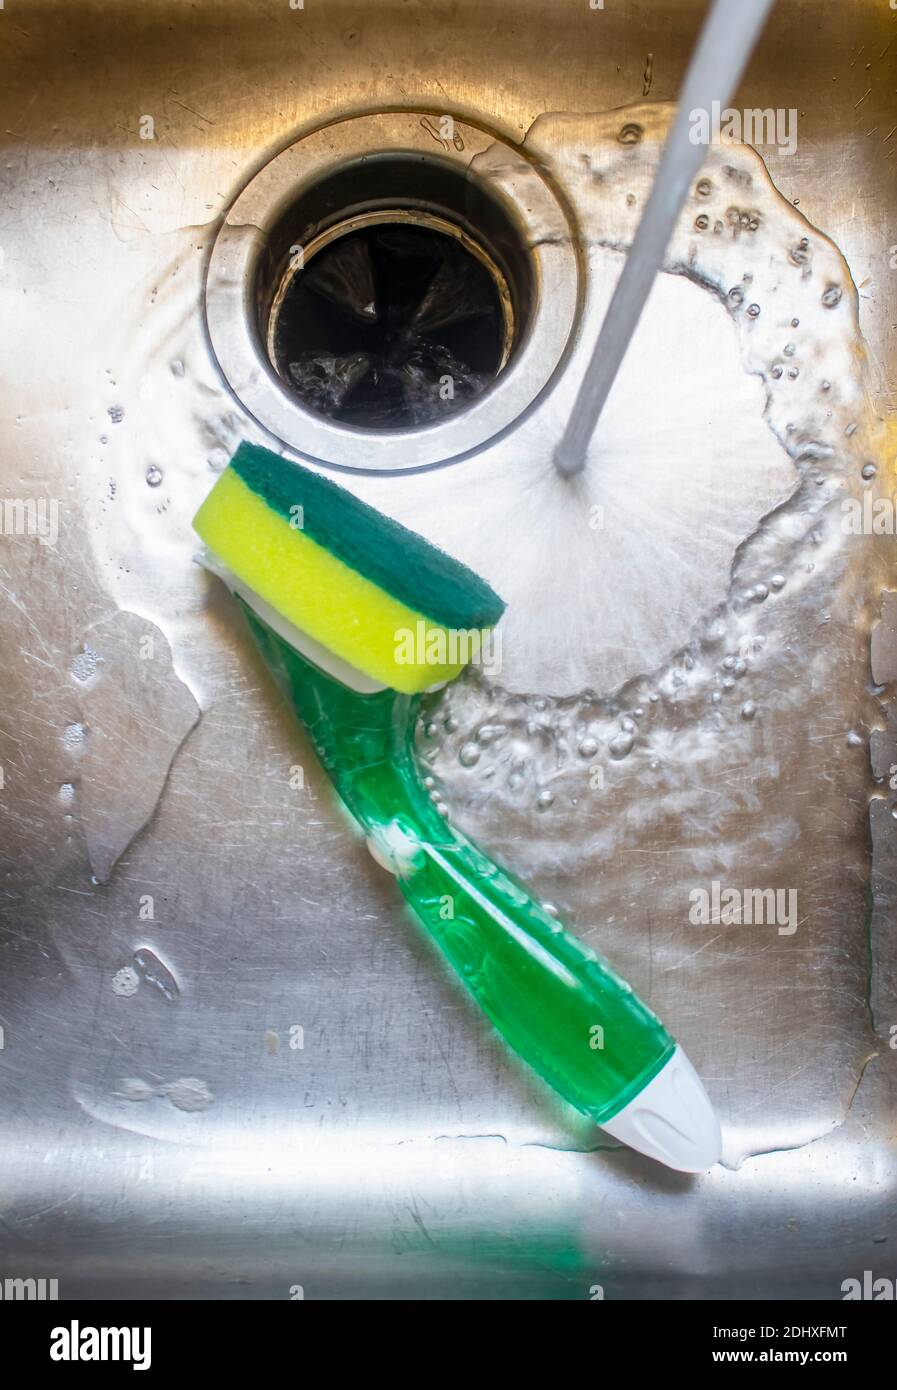 Water from tap running into stainless steel sink with pot scrubber lying in it. Stock Photo